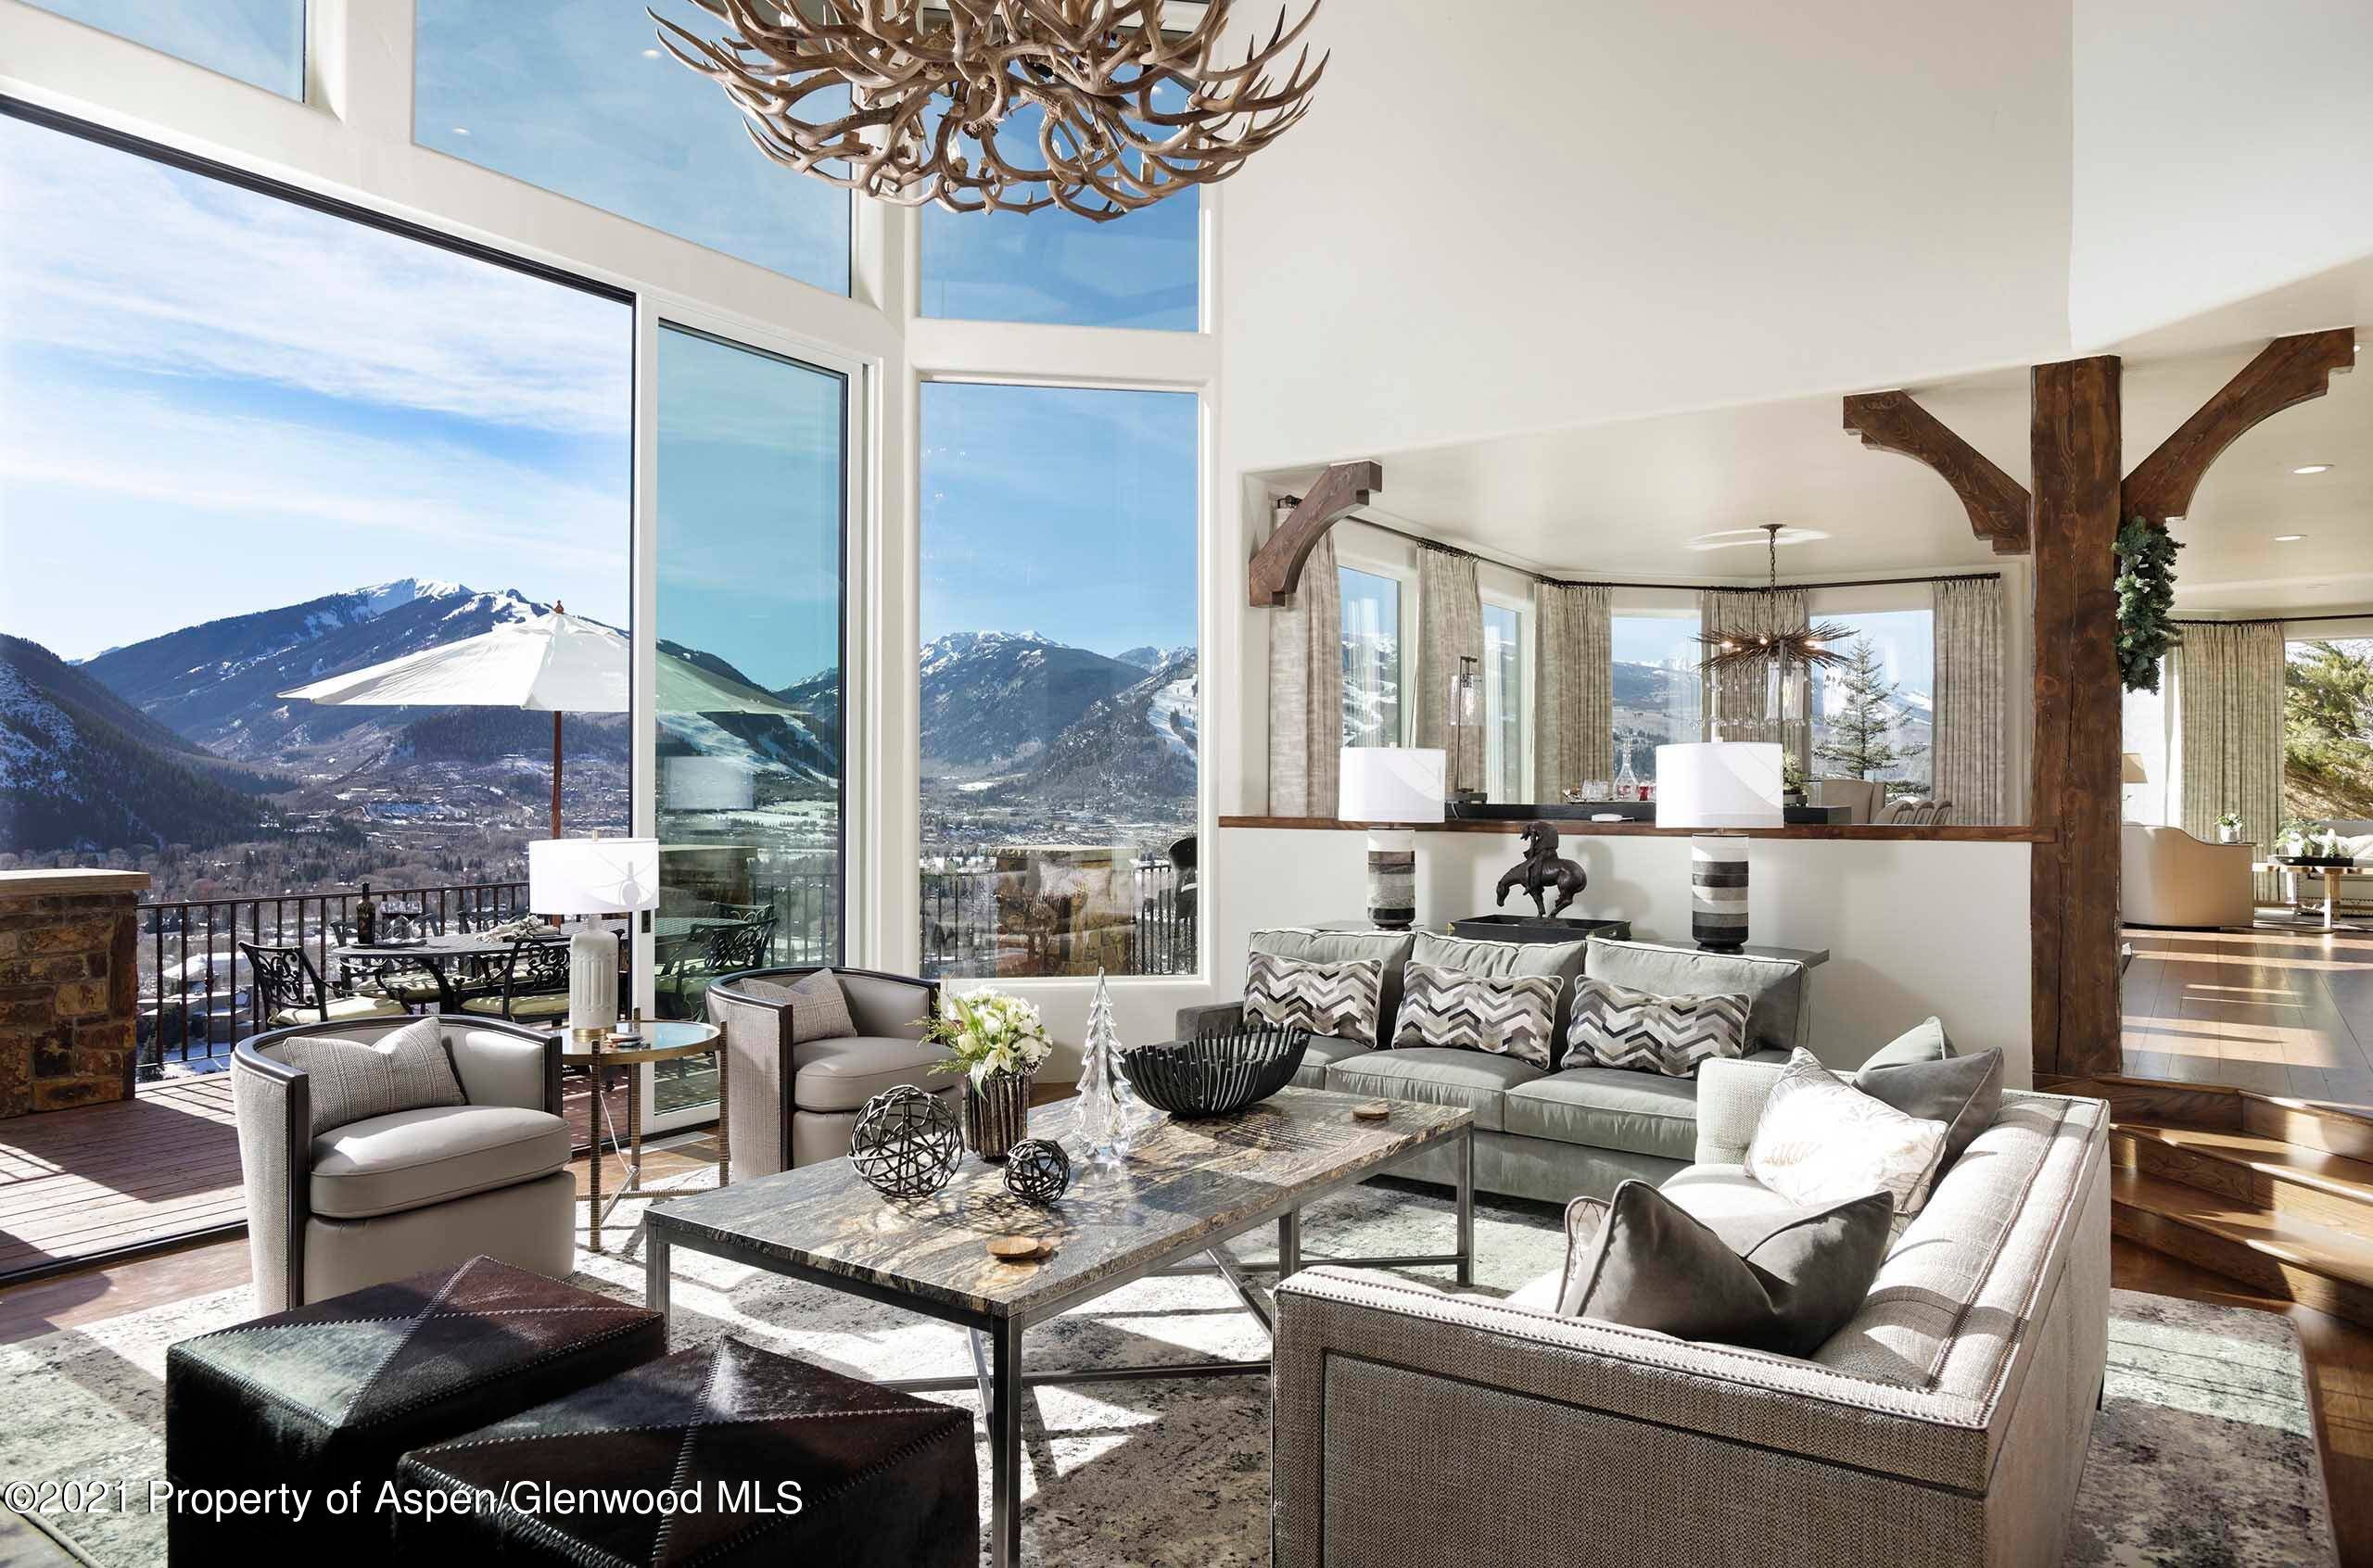 Experience the natural beauty of Aspen from the expansive decking of Red Mountain Rise, all the way to Aspen Mountain, Independence Pass and Maroon Bells.